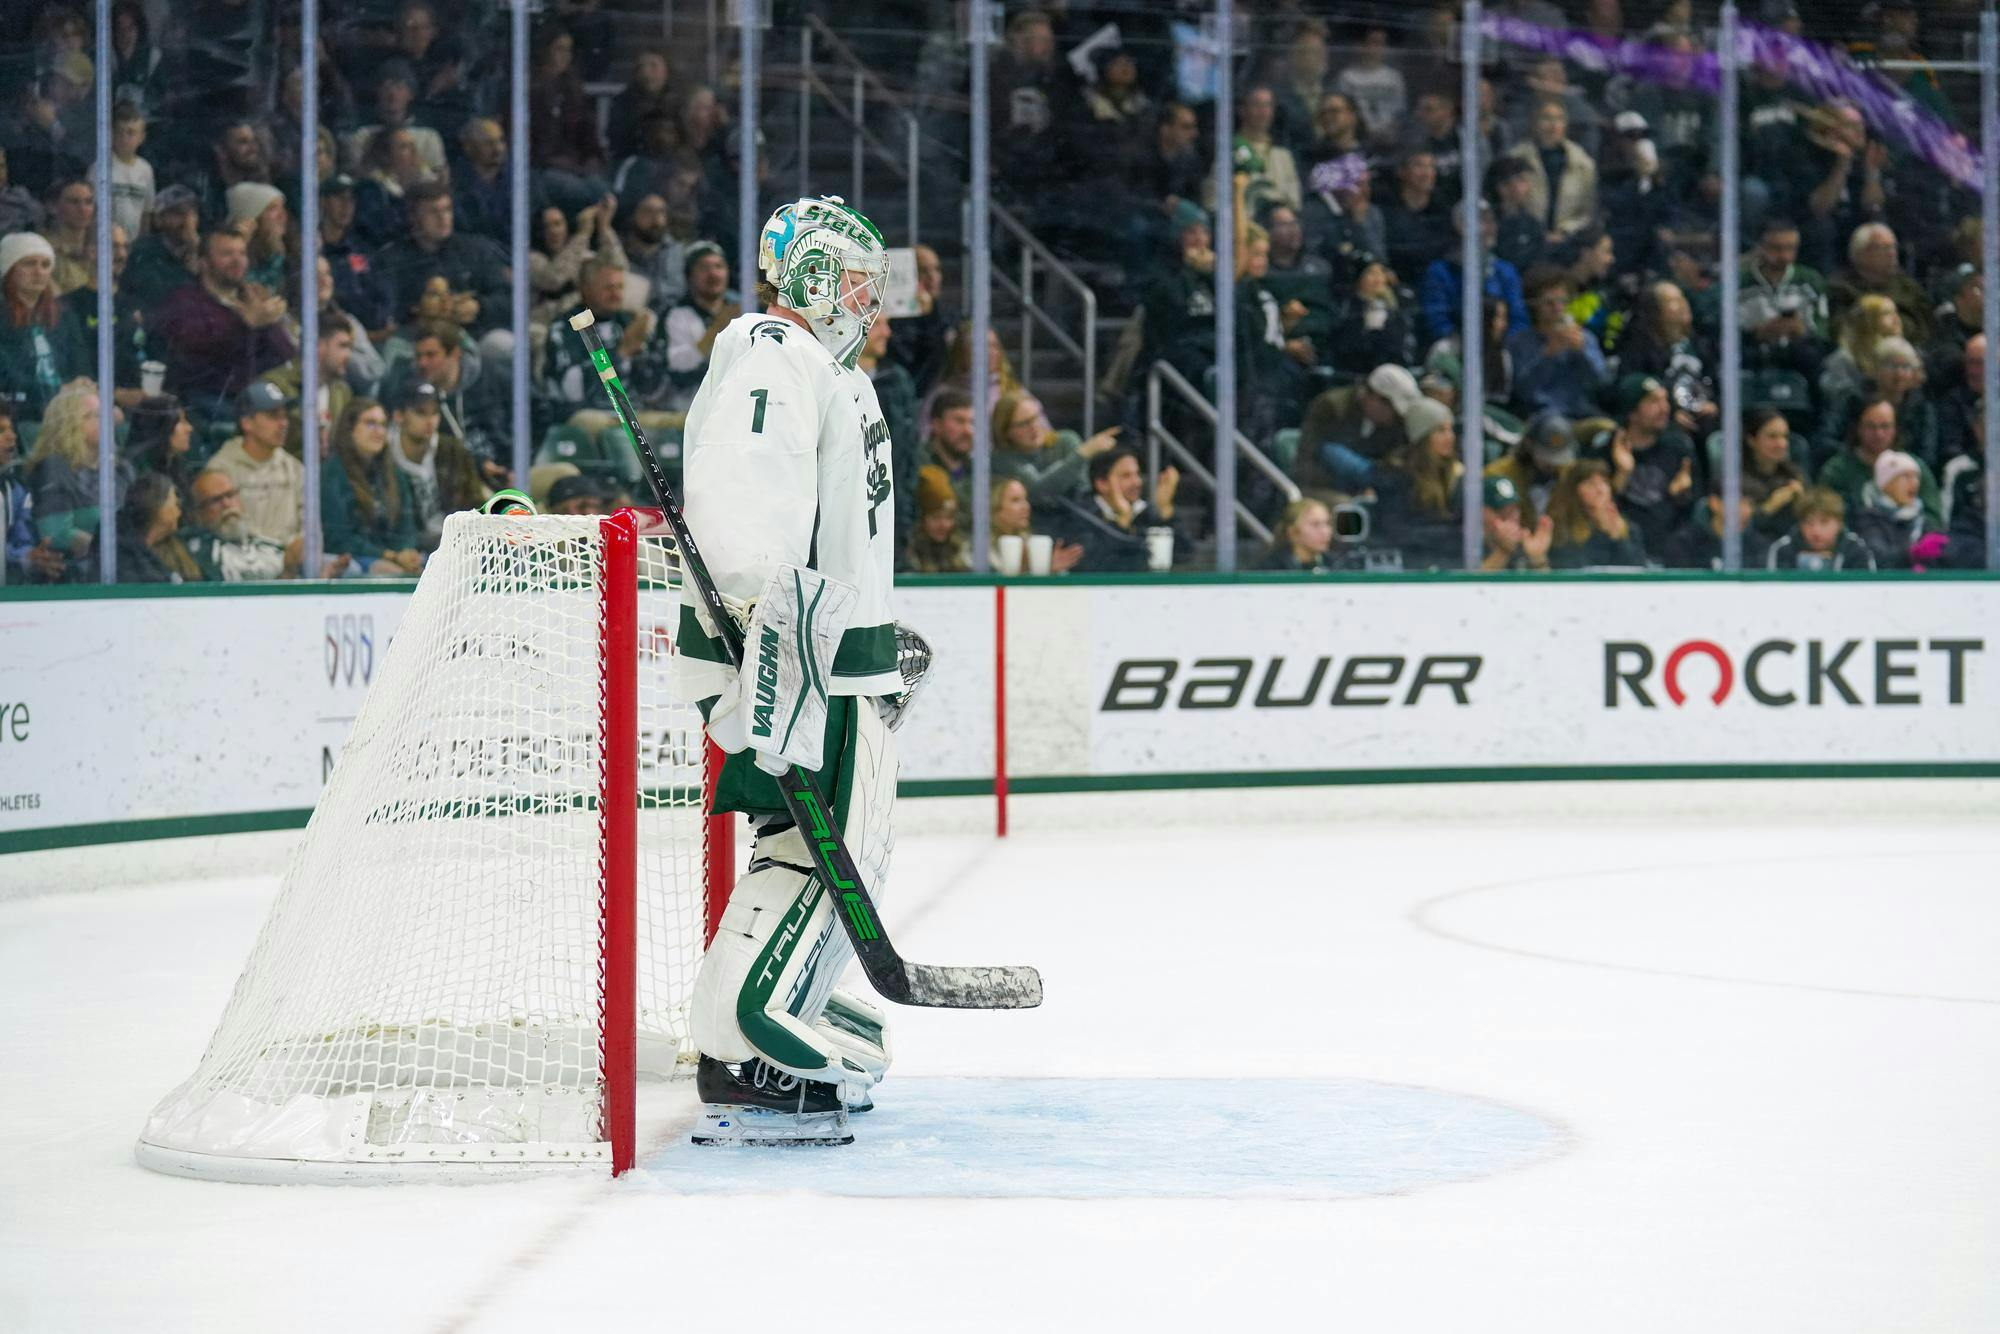 <p>Freshman goalie Trey Augustine (1) looking focused during a game against Penn State at the Munn Ice Arena on Nov. 10, 2023. Augustine would end the game with 37 saves. The Nittany Lions would convert two out of 4 shootout attempts against Augustine on their way to victory.</p>